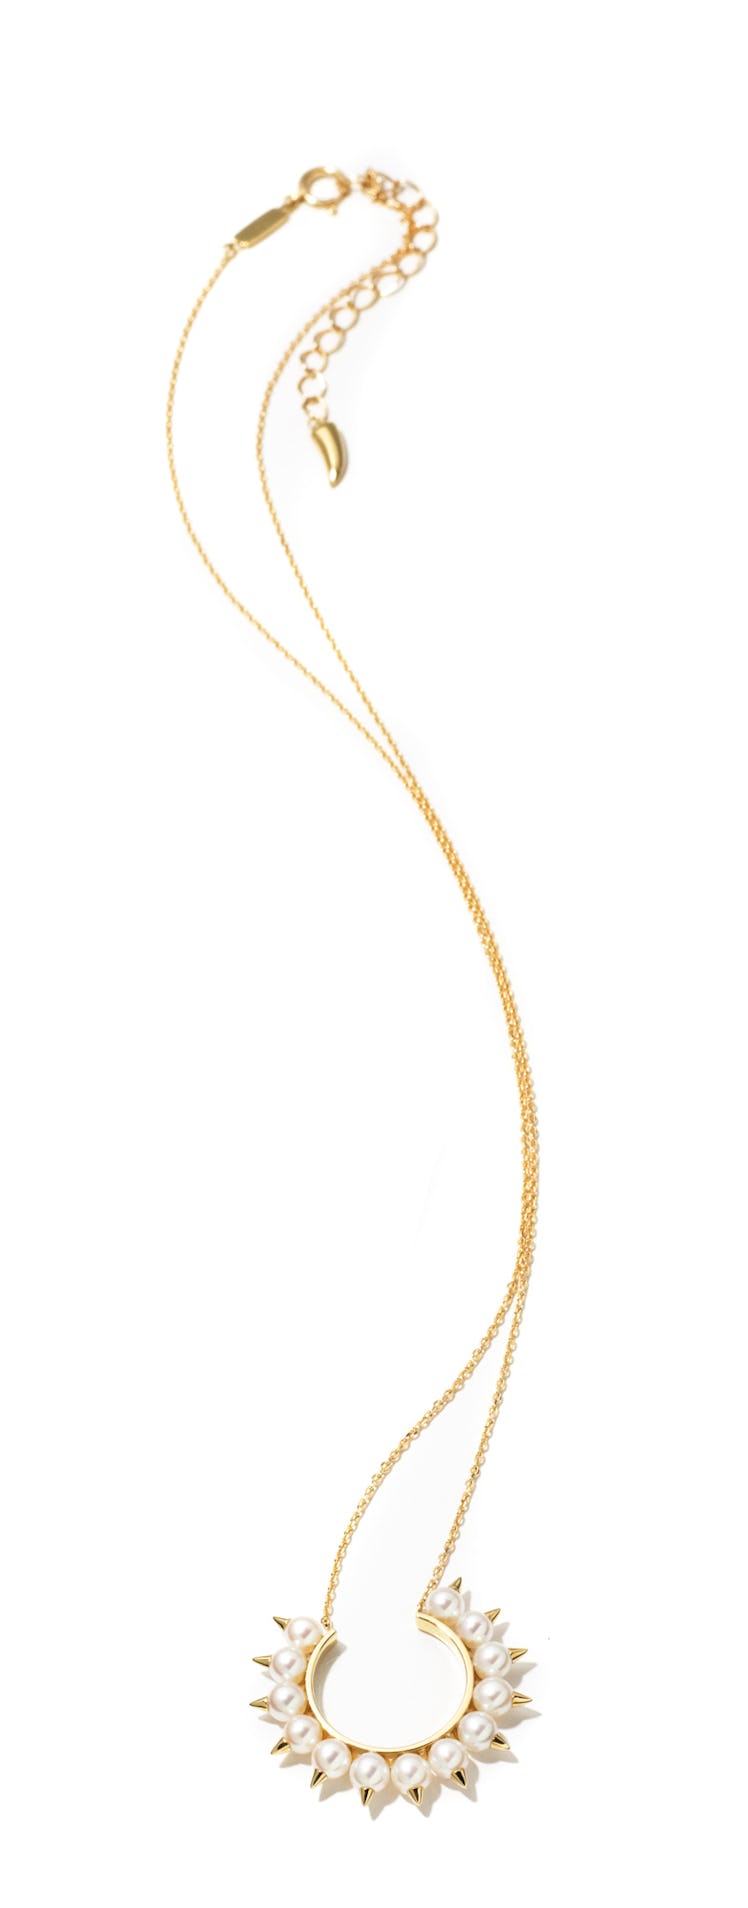 Tasaki Collection by Thakoon gold and freshwater pearl necklace, $2,400, Forty Five Ten, Dallas.